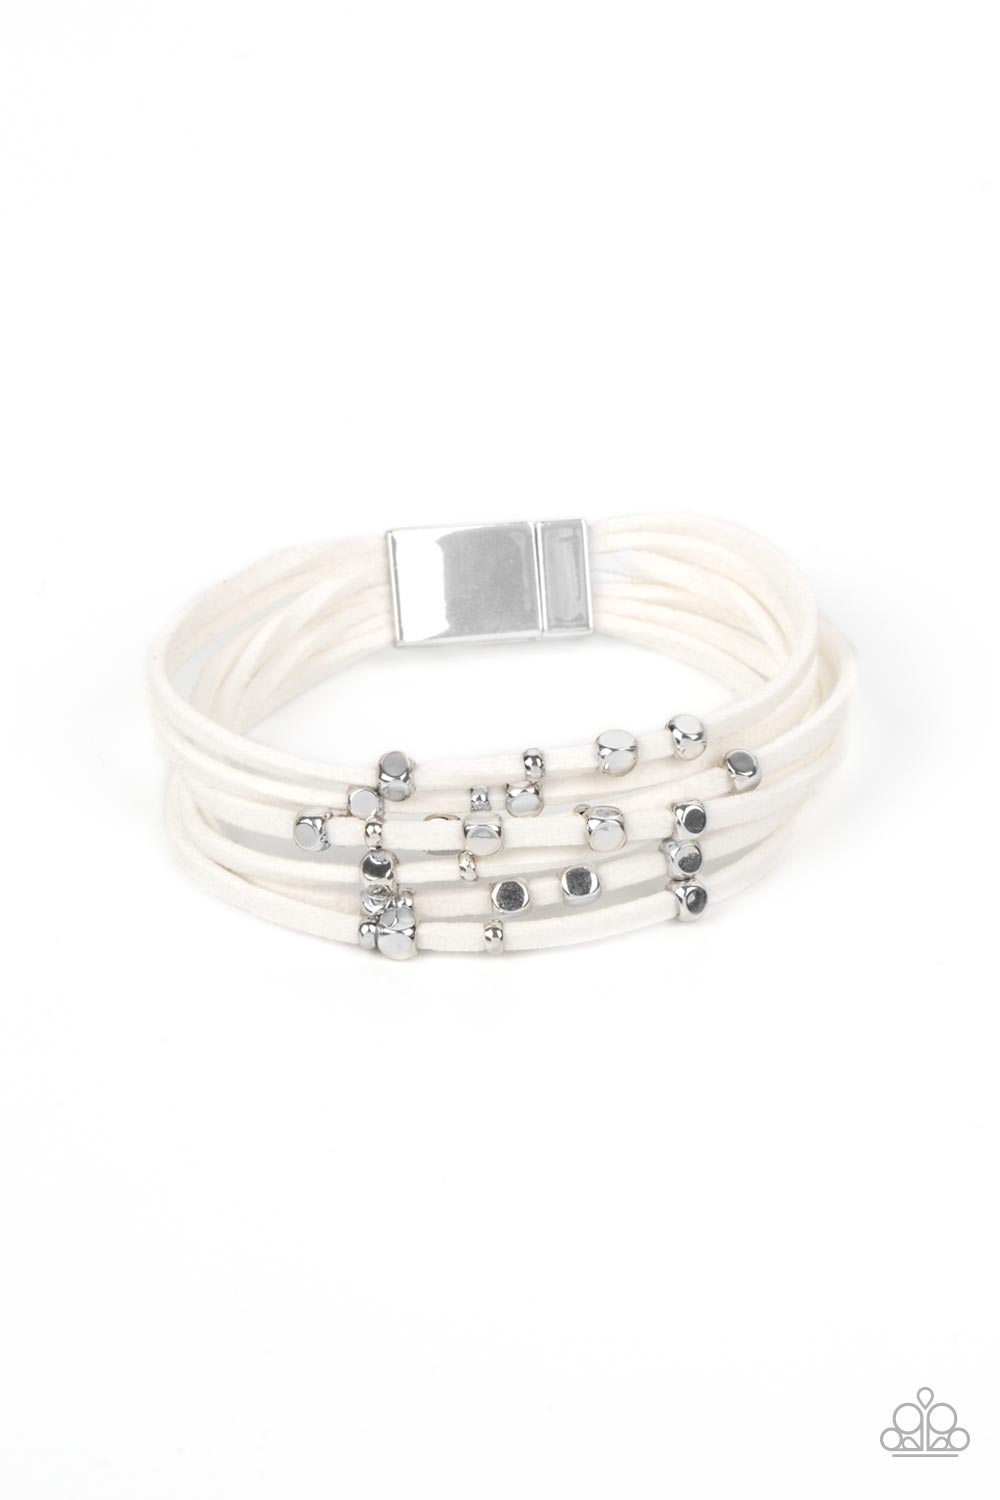 Paparazzi Bracelet - Clustered Constellations - White